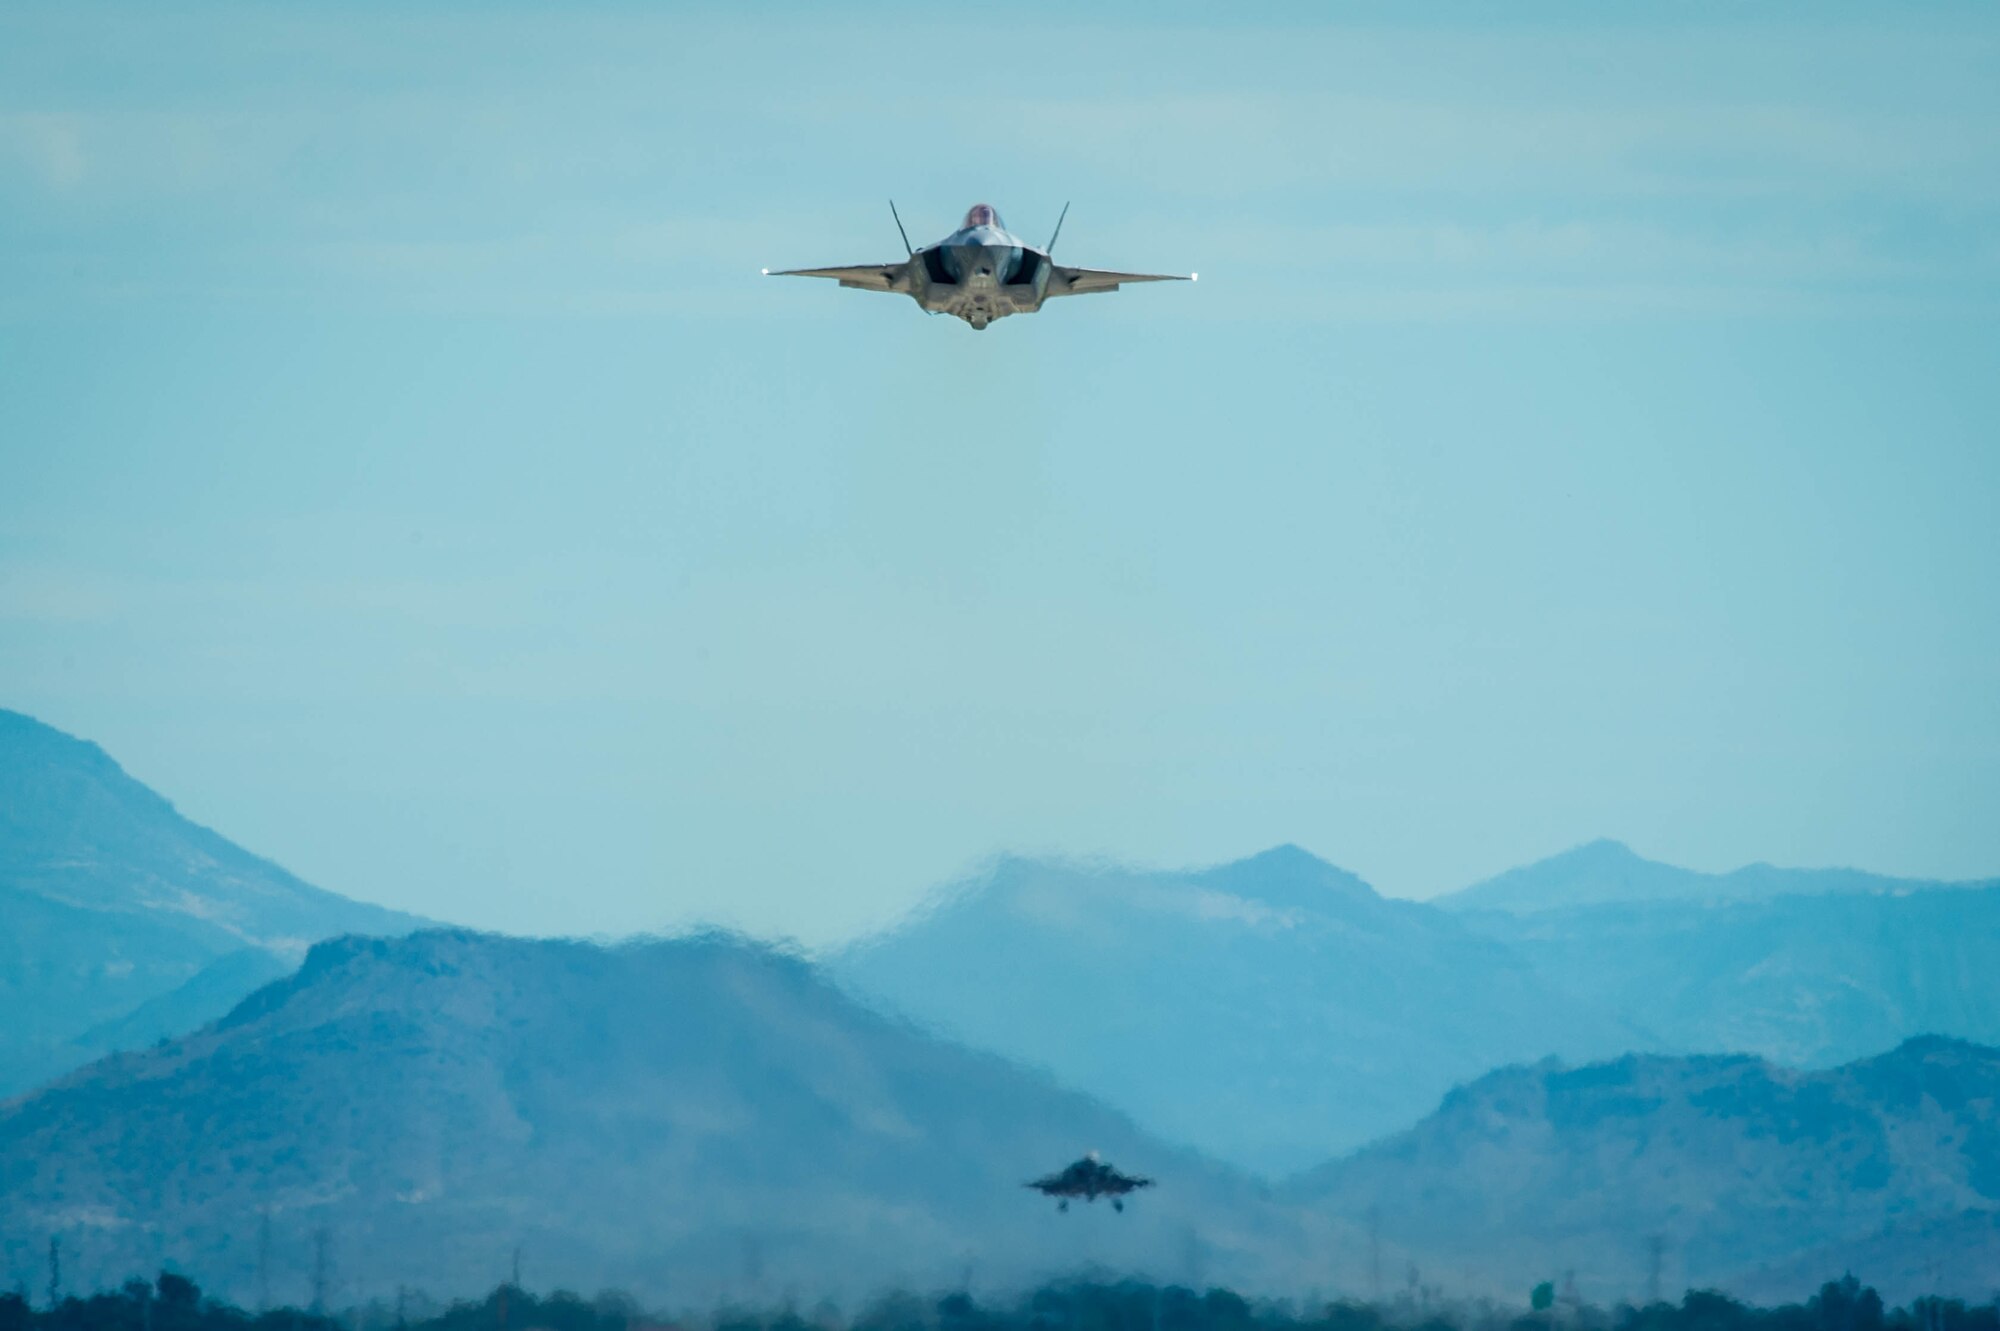 An F-35A Lightning II flies over the flightline at Luke Air Force Base, Ariz. Aug. 21, 2017. The F-35 is a multirole fighter jet able to perform missions which traditionally required numerous specialized aircraft. As the primary training location for the U.S. Air Force and partner nations, Luke is currently home to 61 F-35s projected to grow to 144 in the near future. (U.S. Air Force photo/Staff Sgt. Jensen Stidham)